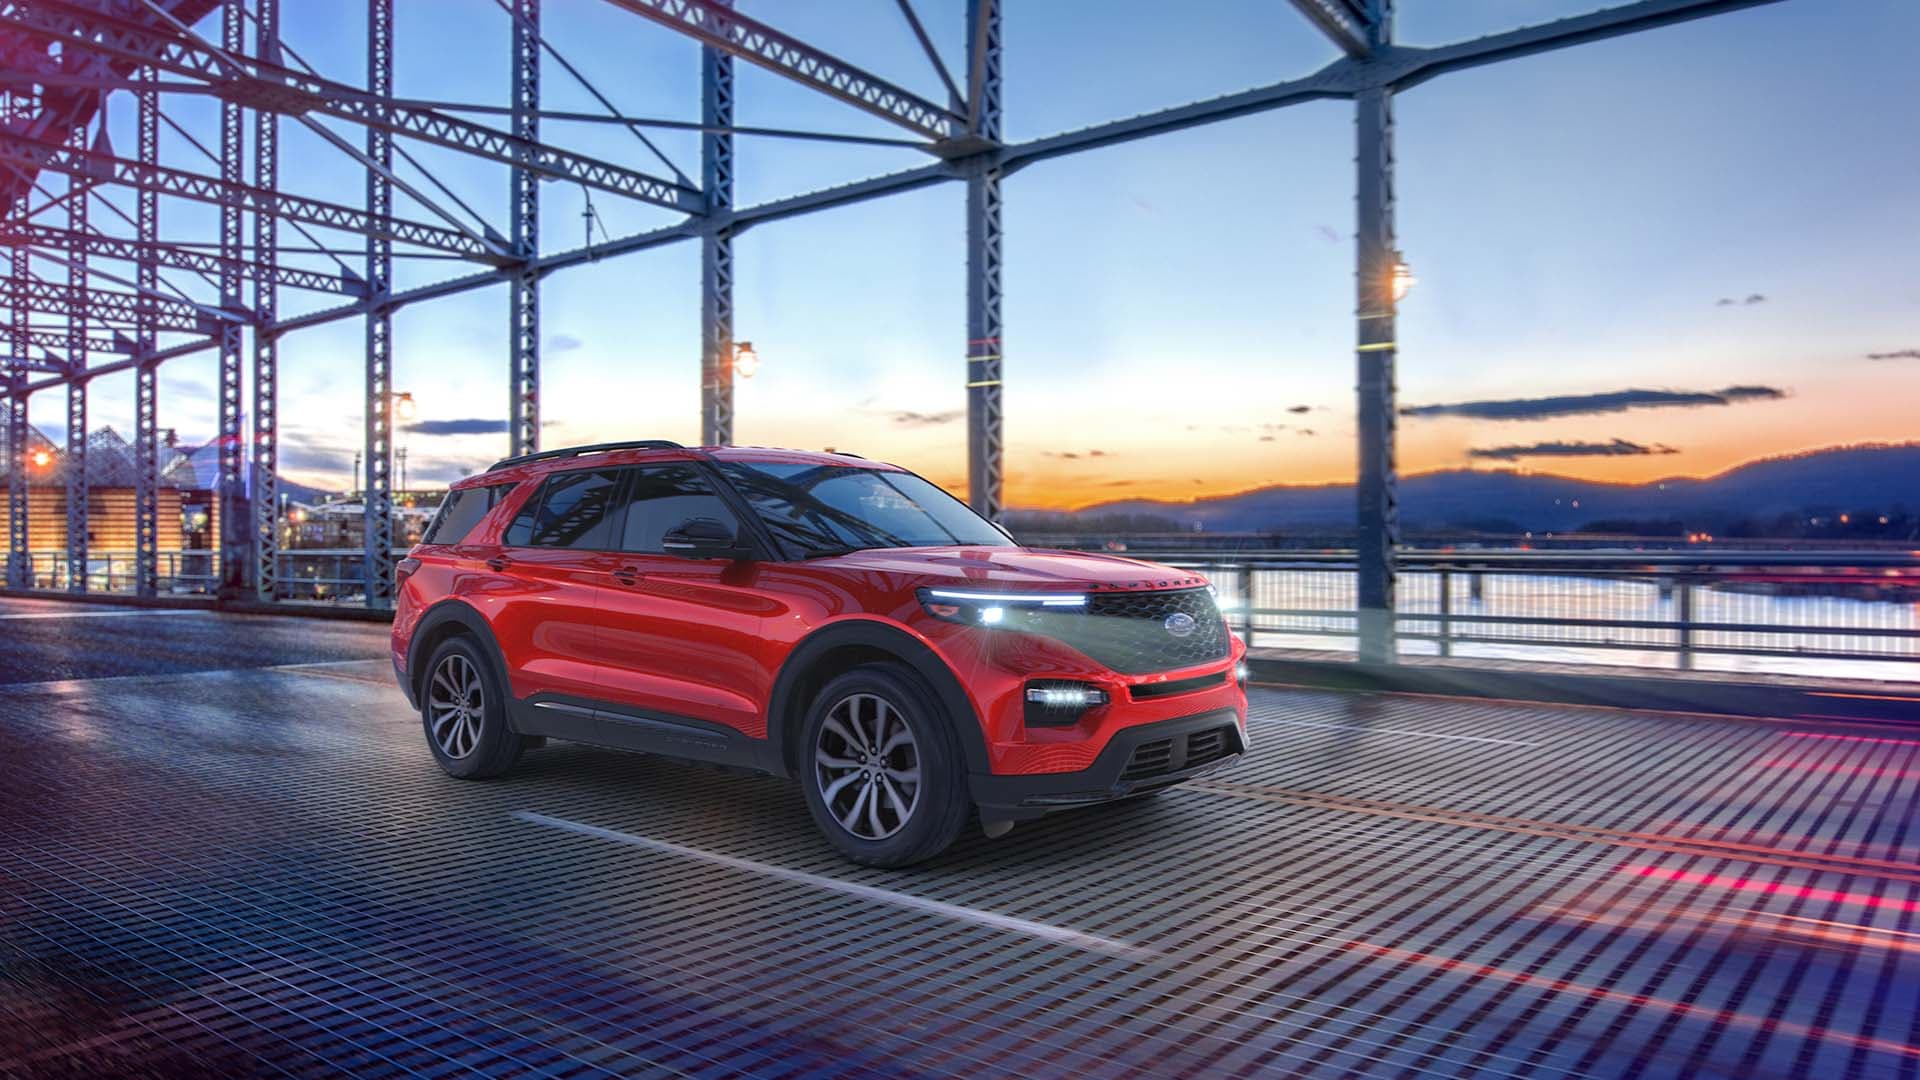 Exterior view of the 2022 Ford Explorer